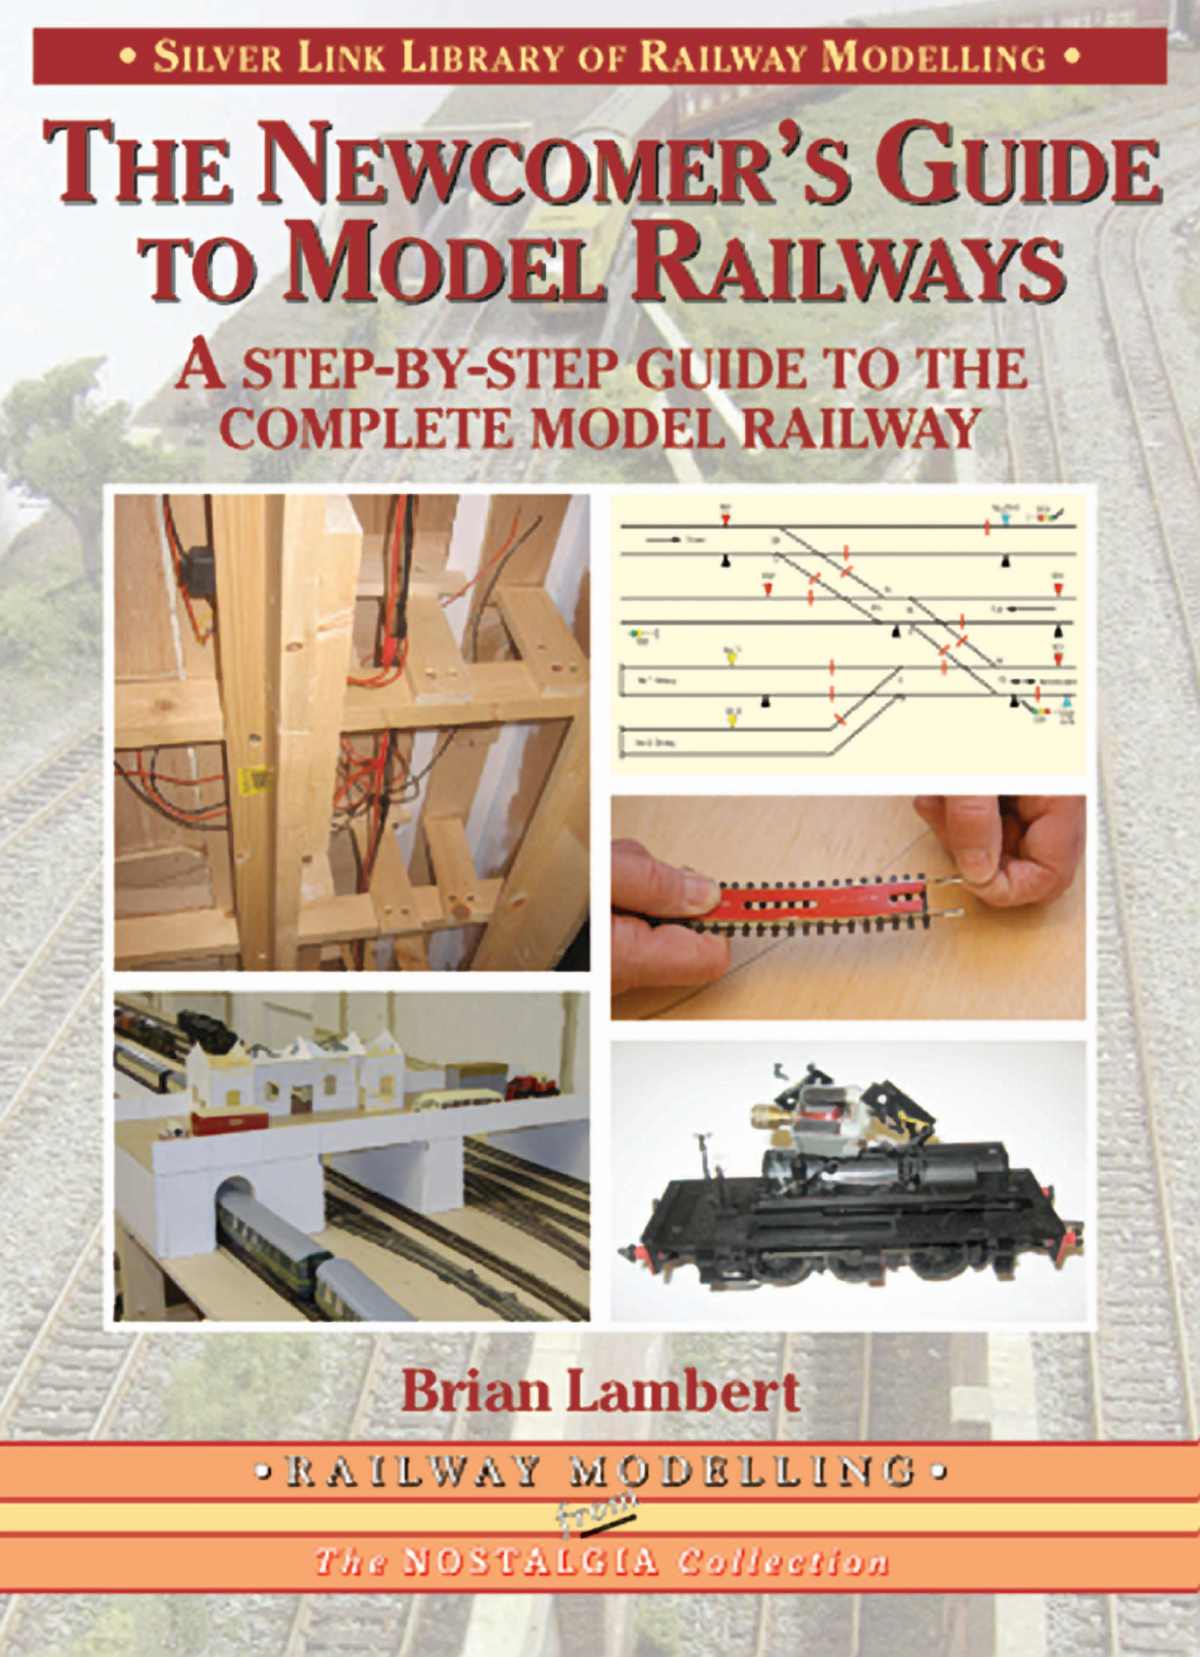 3290 The Newcomer's Guide to Model Railways